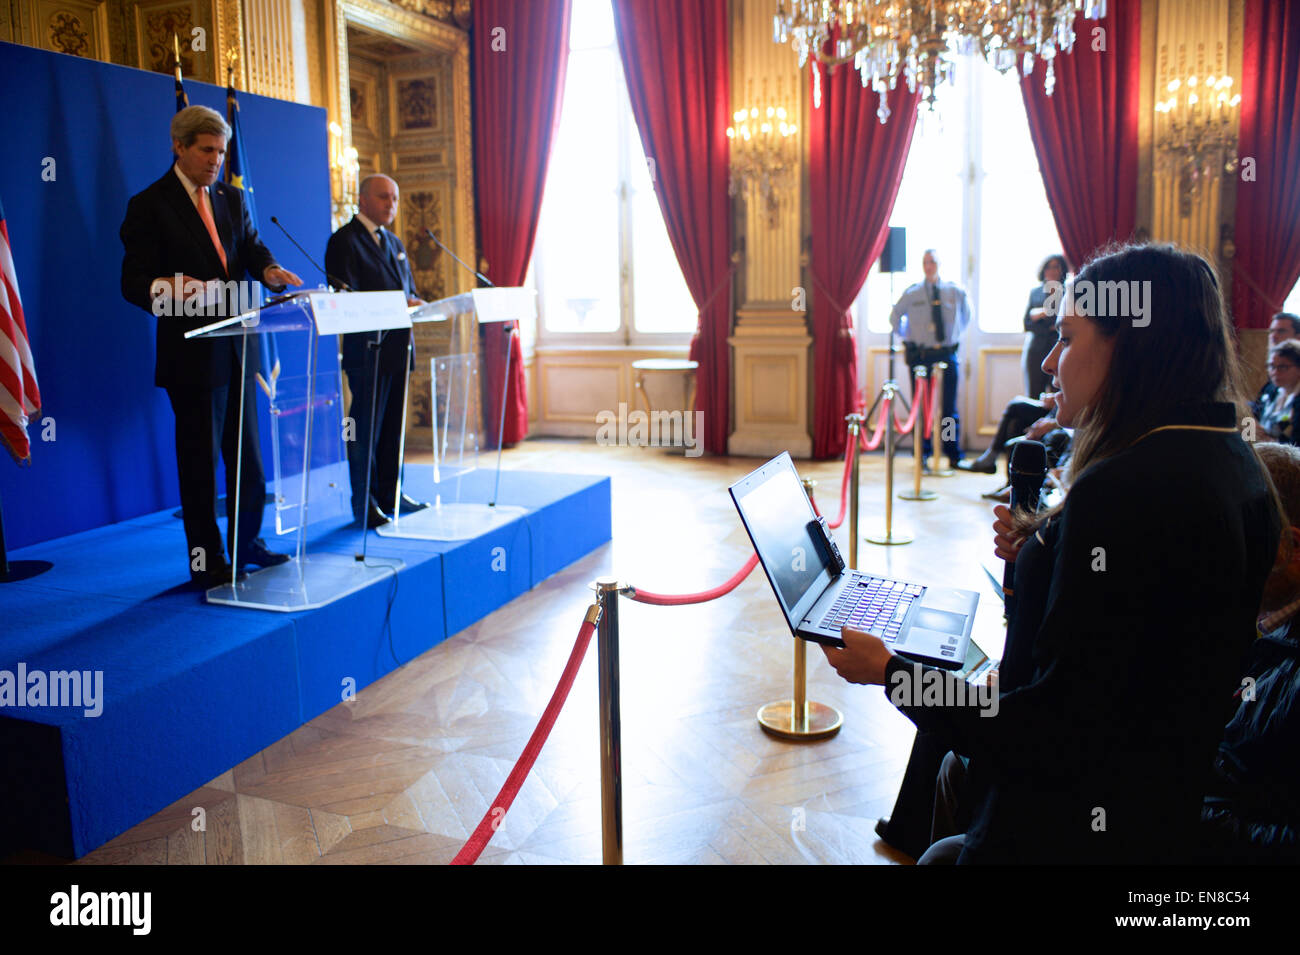 Felicia Schwartz of The Wall Street Journal questions U.S. Secretary of State John Kerry and French Foreign Minister Laurent Fabius during a joint news conference on March 7, 2015, in the Quai d'Orsay - the French Foreign Minister building - in Paris, France, following a bilateral meeting focused on the Secretary's recent Iran nuclear negotiations, his meeting with the Gulf Cooperation Council in Saudi Arabia, Ukraine, and other regional issues. Stock Photo